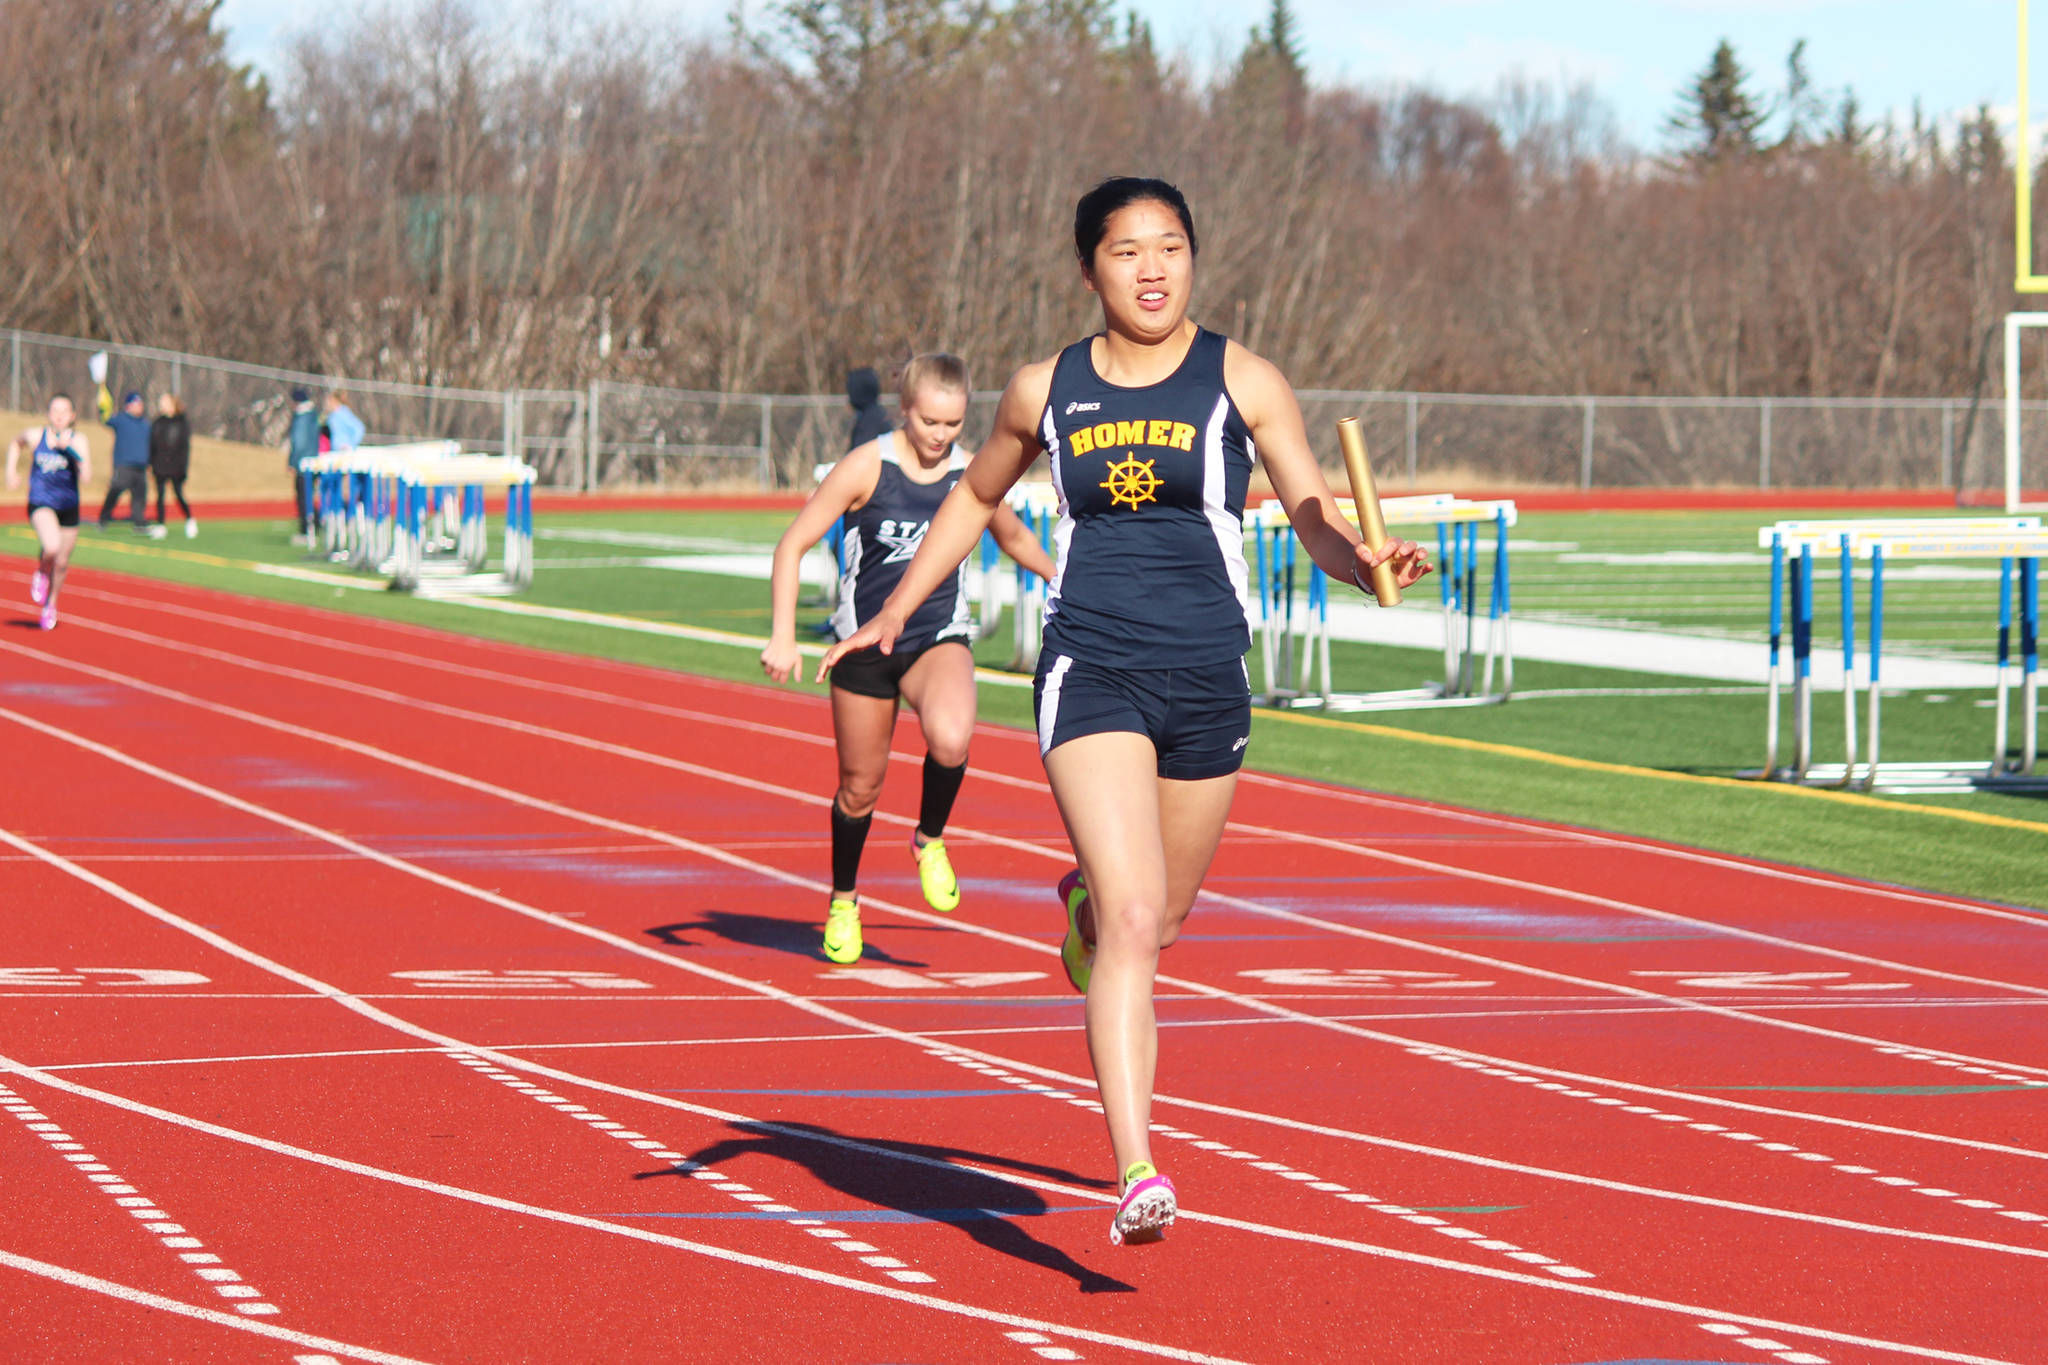 Photo by Megan Pacer/Homer News Homer’s Kailee Veldstra crosses the finish line of the girls’ 400-meter relay to claim first place for her team Friday, April 13 at Homer High School.